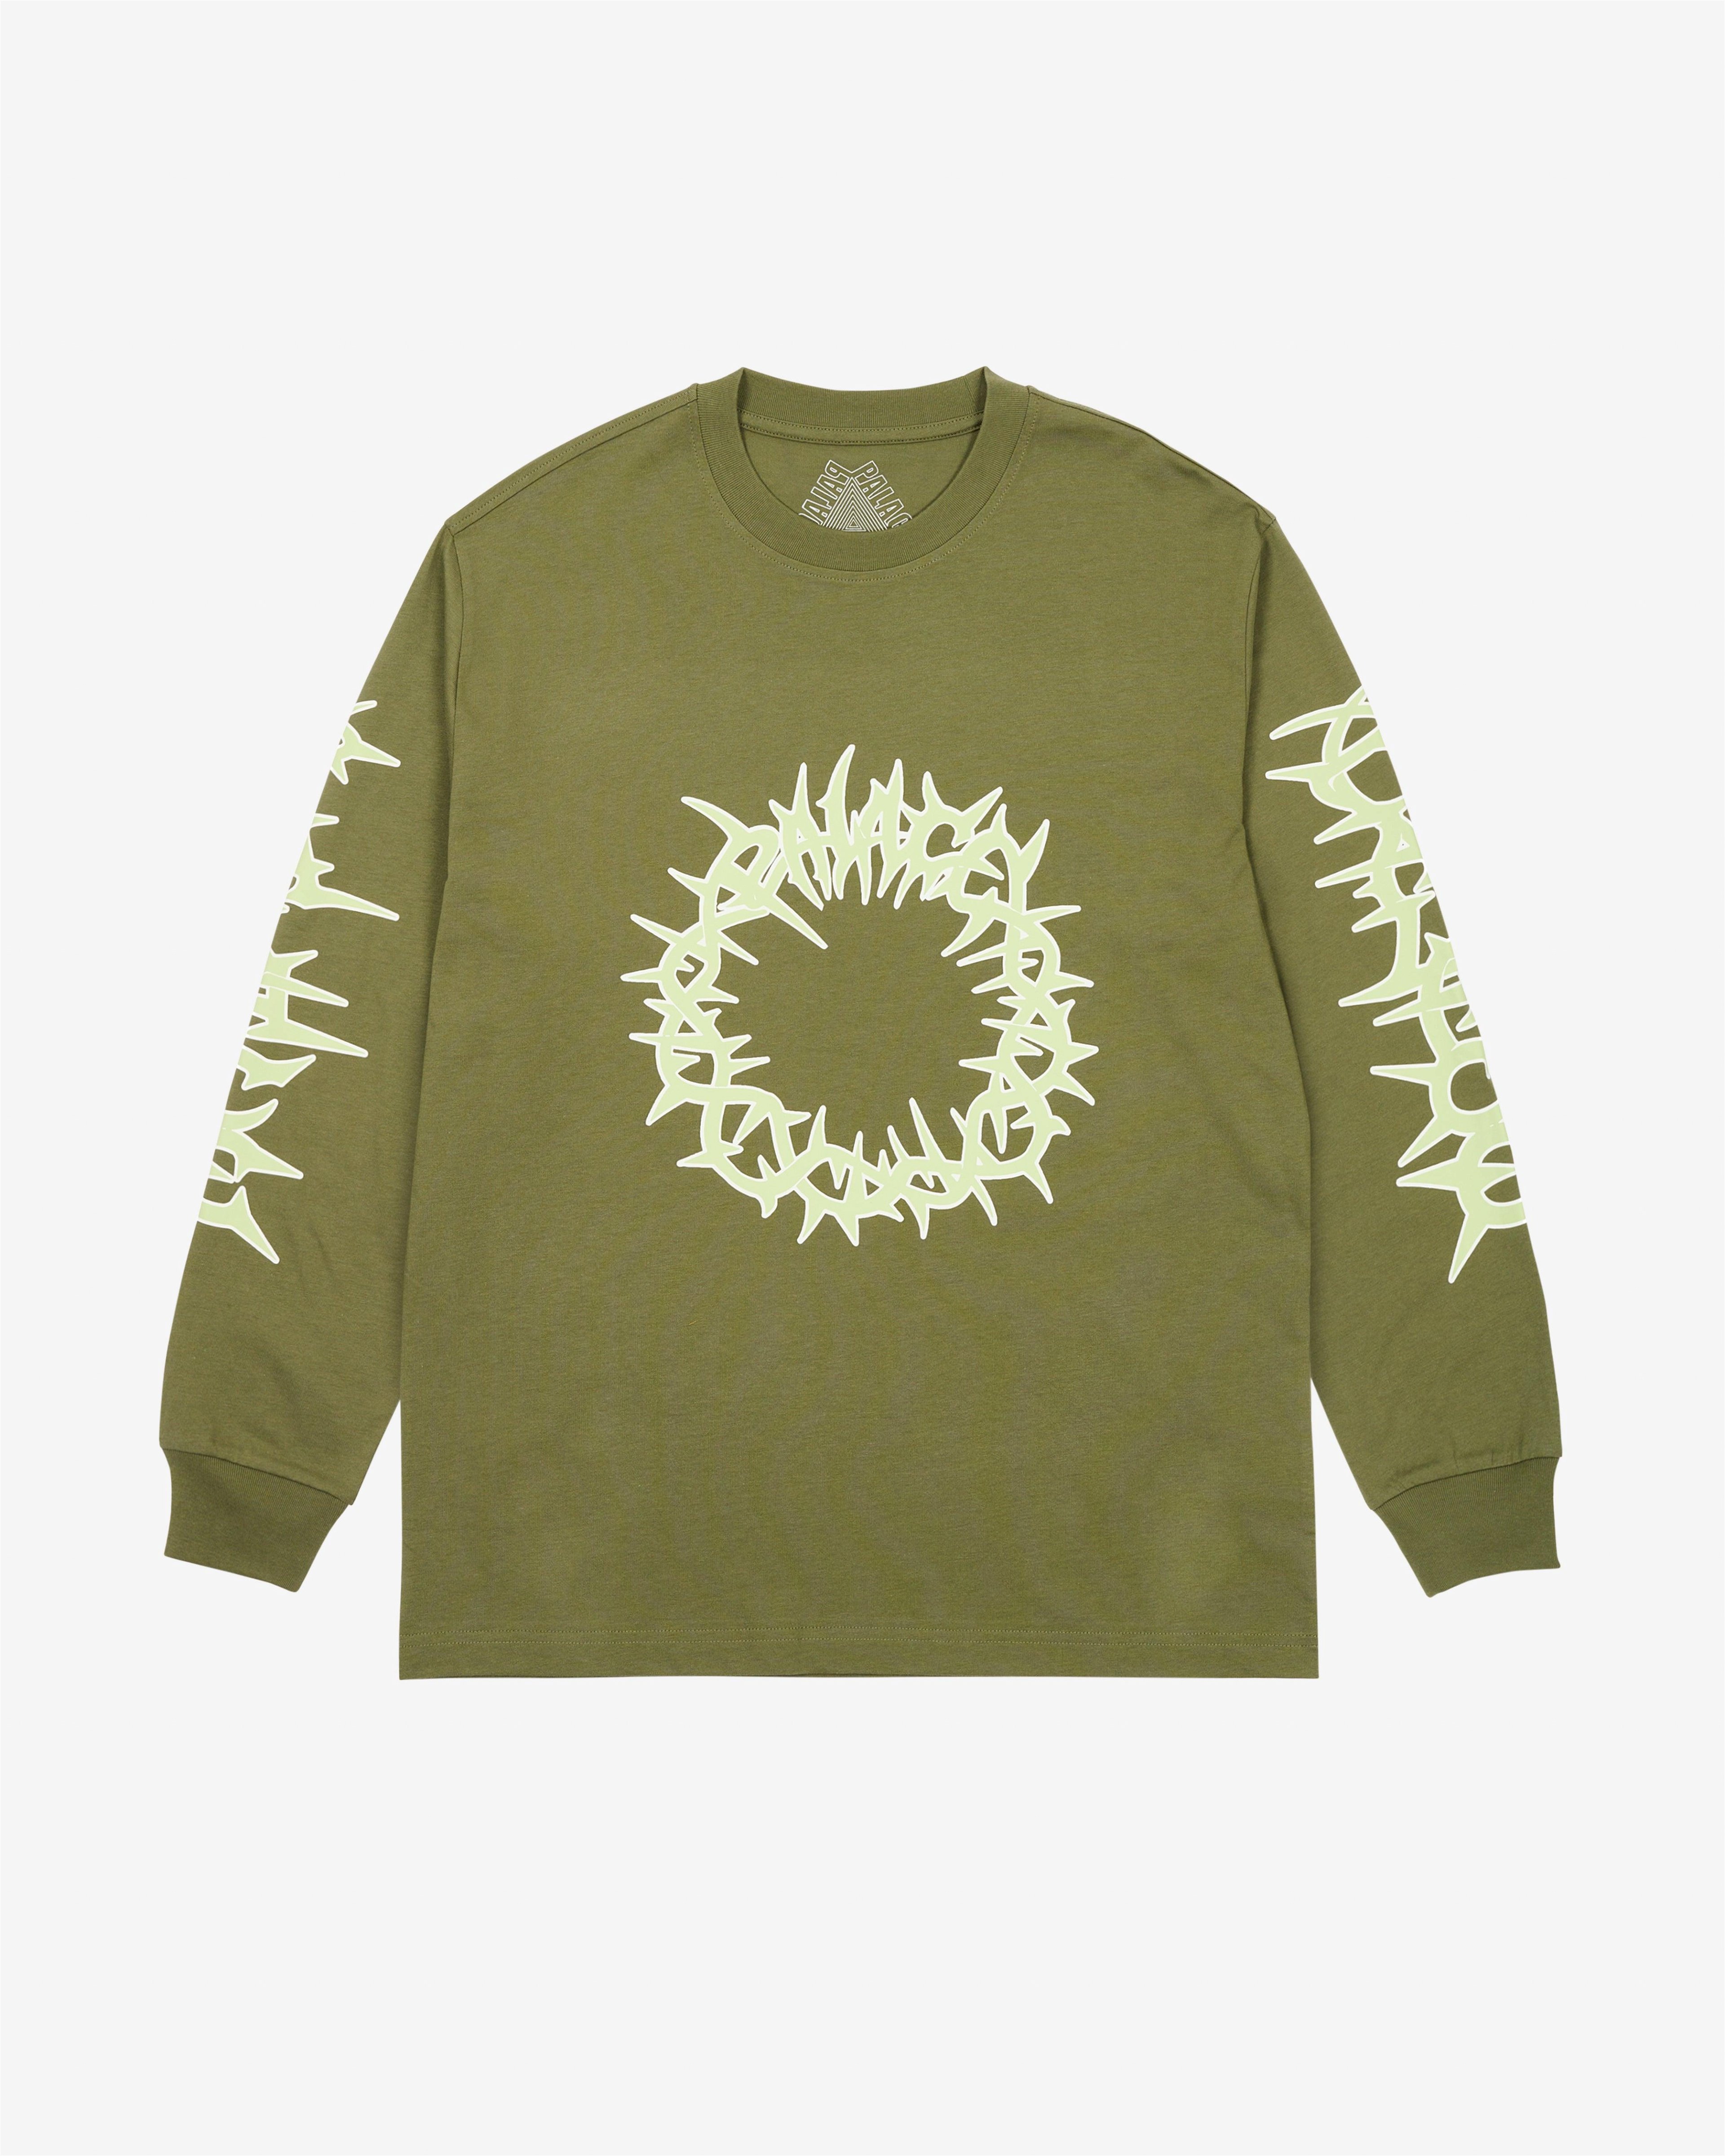 Palace - Men's Spiked Longsleeve - (The Deep Green) by PALACE